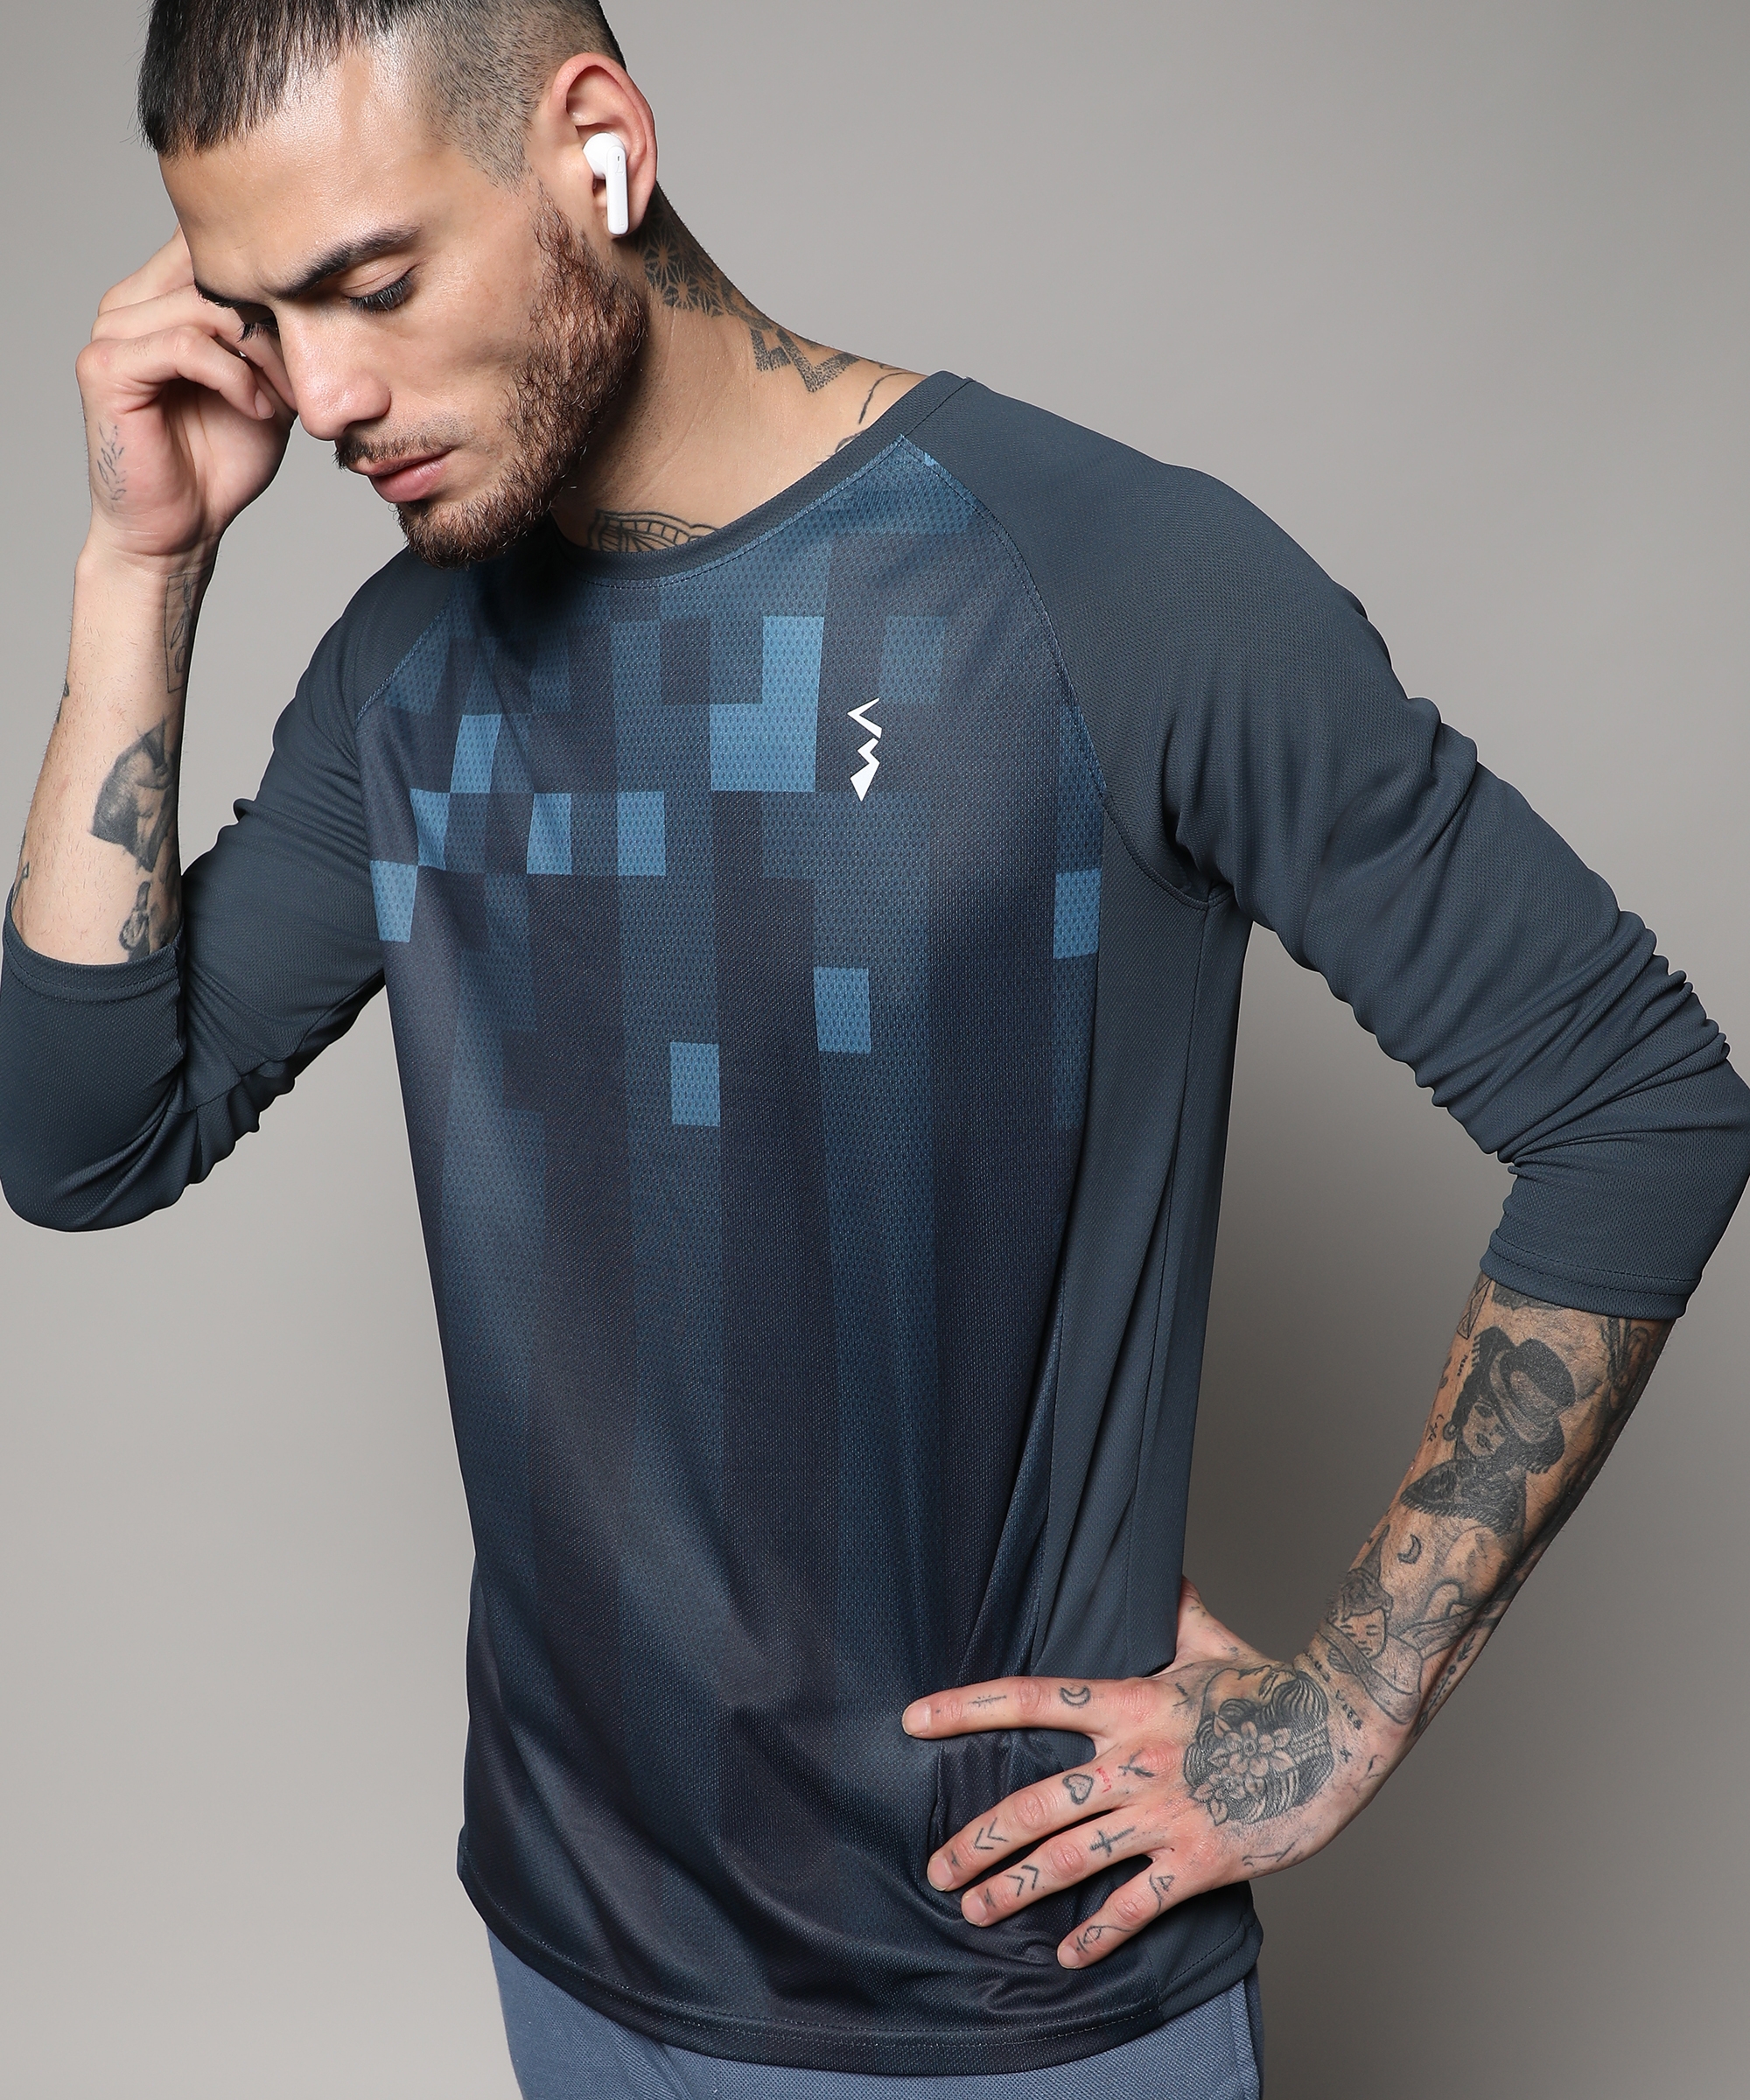 CAMPUS SUTRA | Men's Navy Blue Printed Activewear T-Shirt